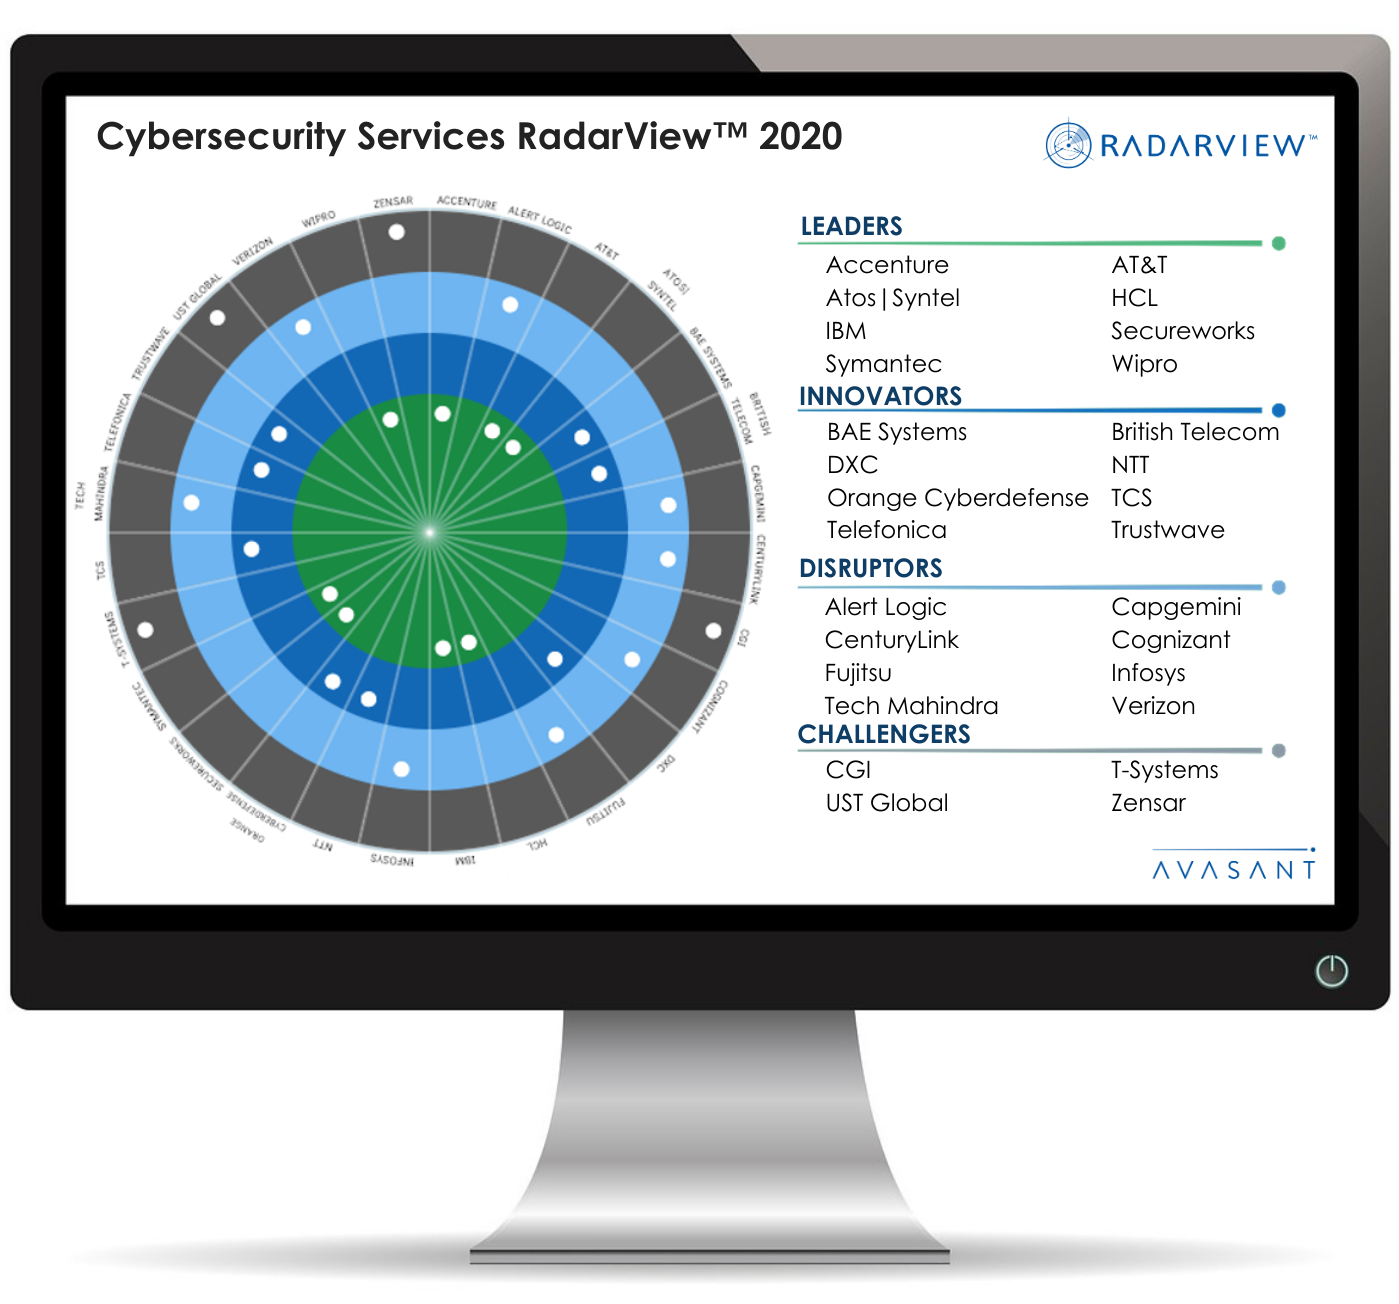 Cybersecurity RV 1 1 - Cybersecurity Services RadarView™ 2020 - HCL